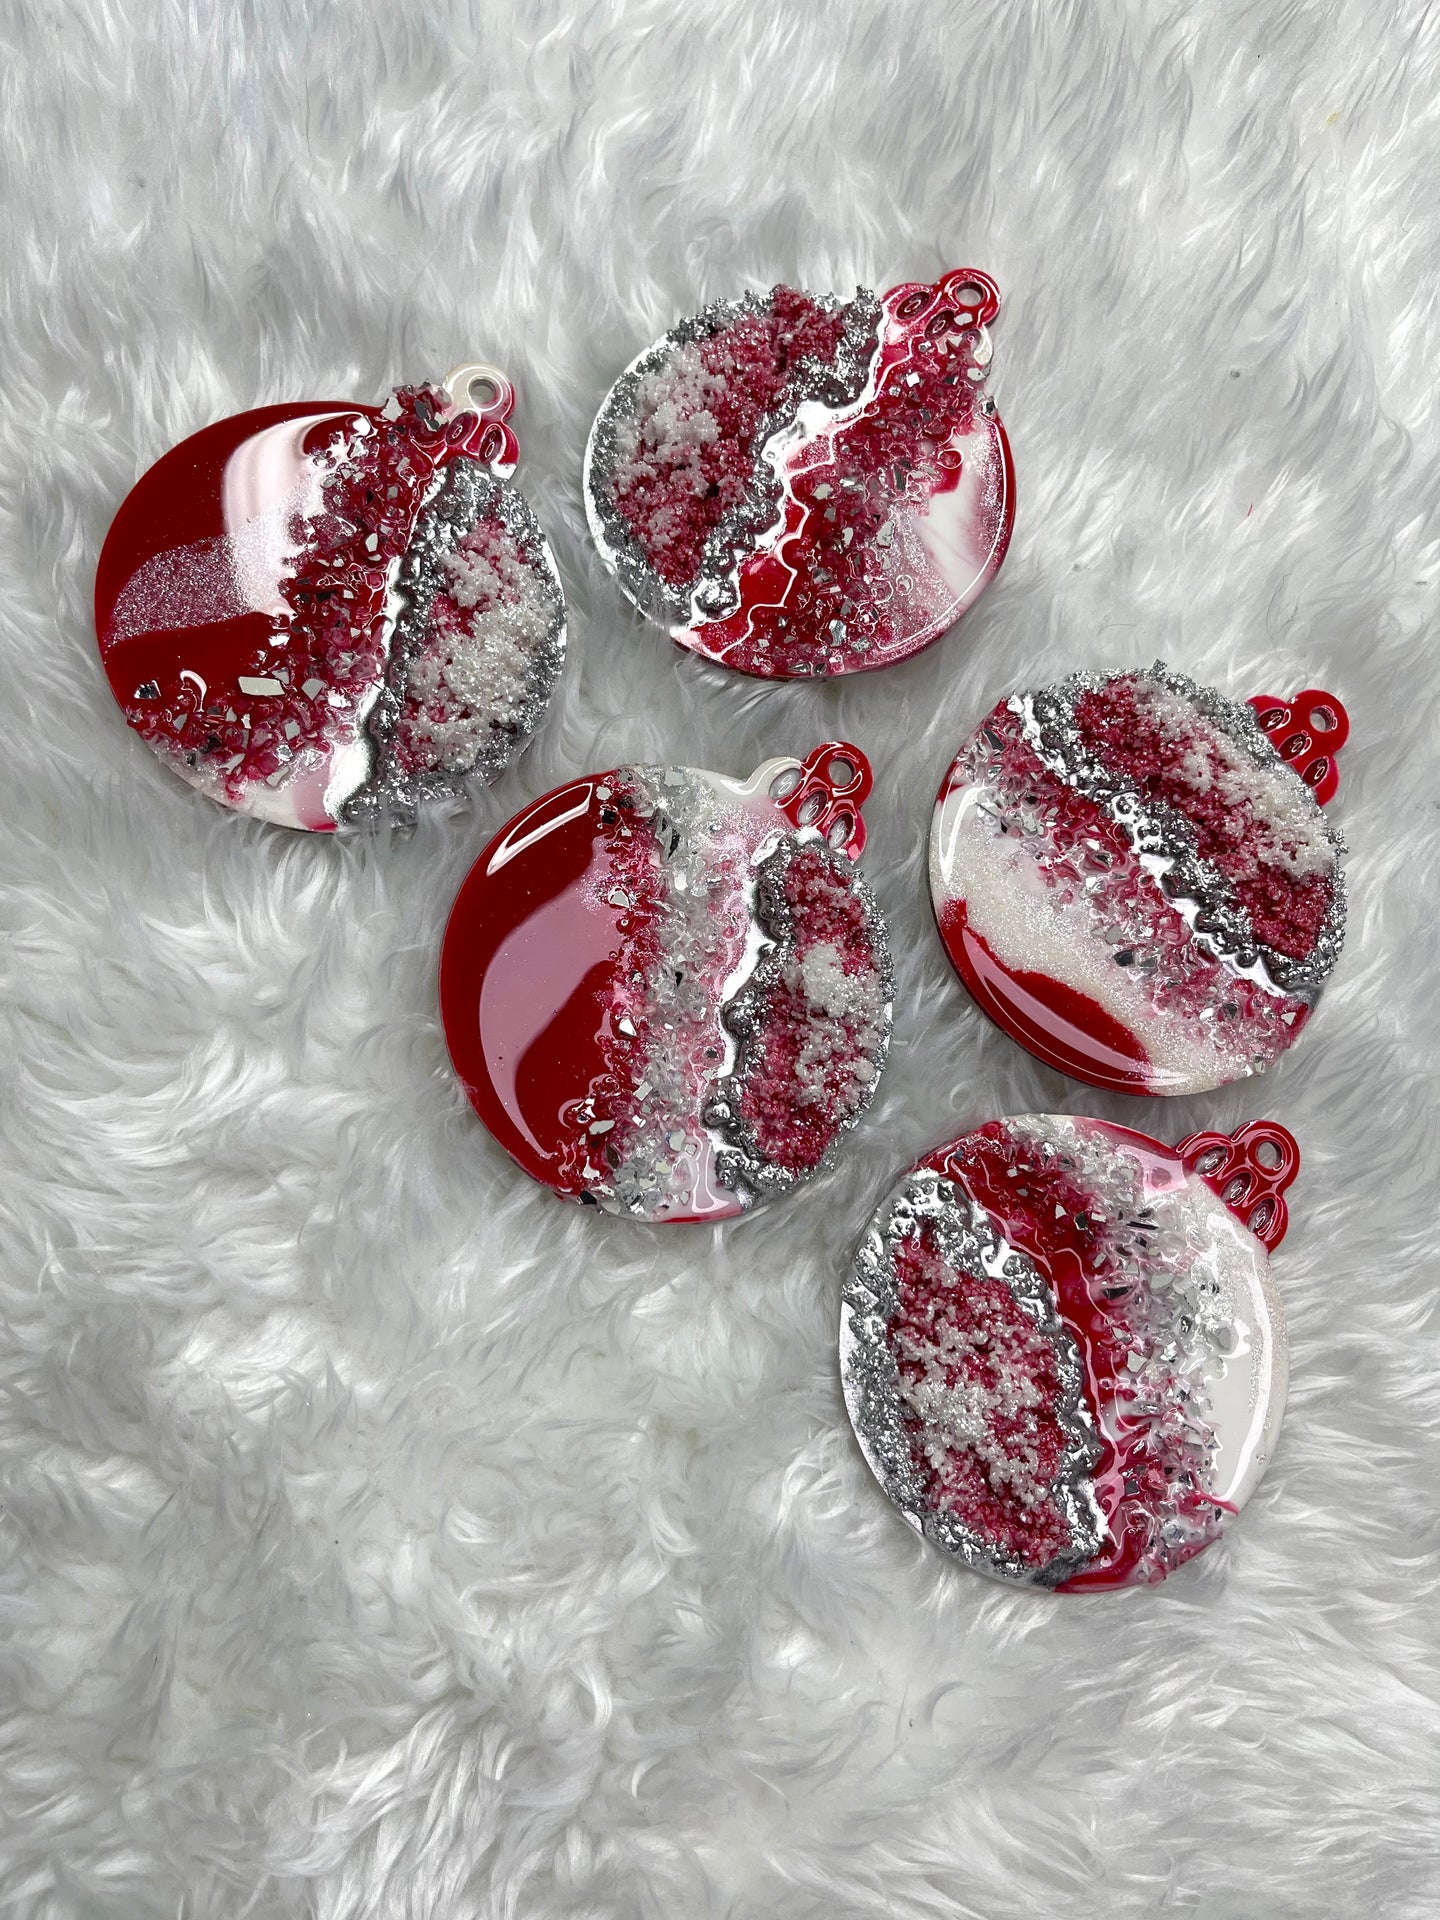 Luxe Geode Ornaments - 5 Count Set: Silver, White & Red